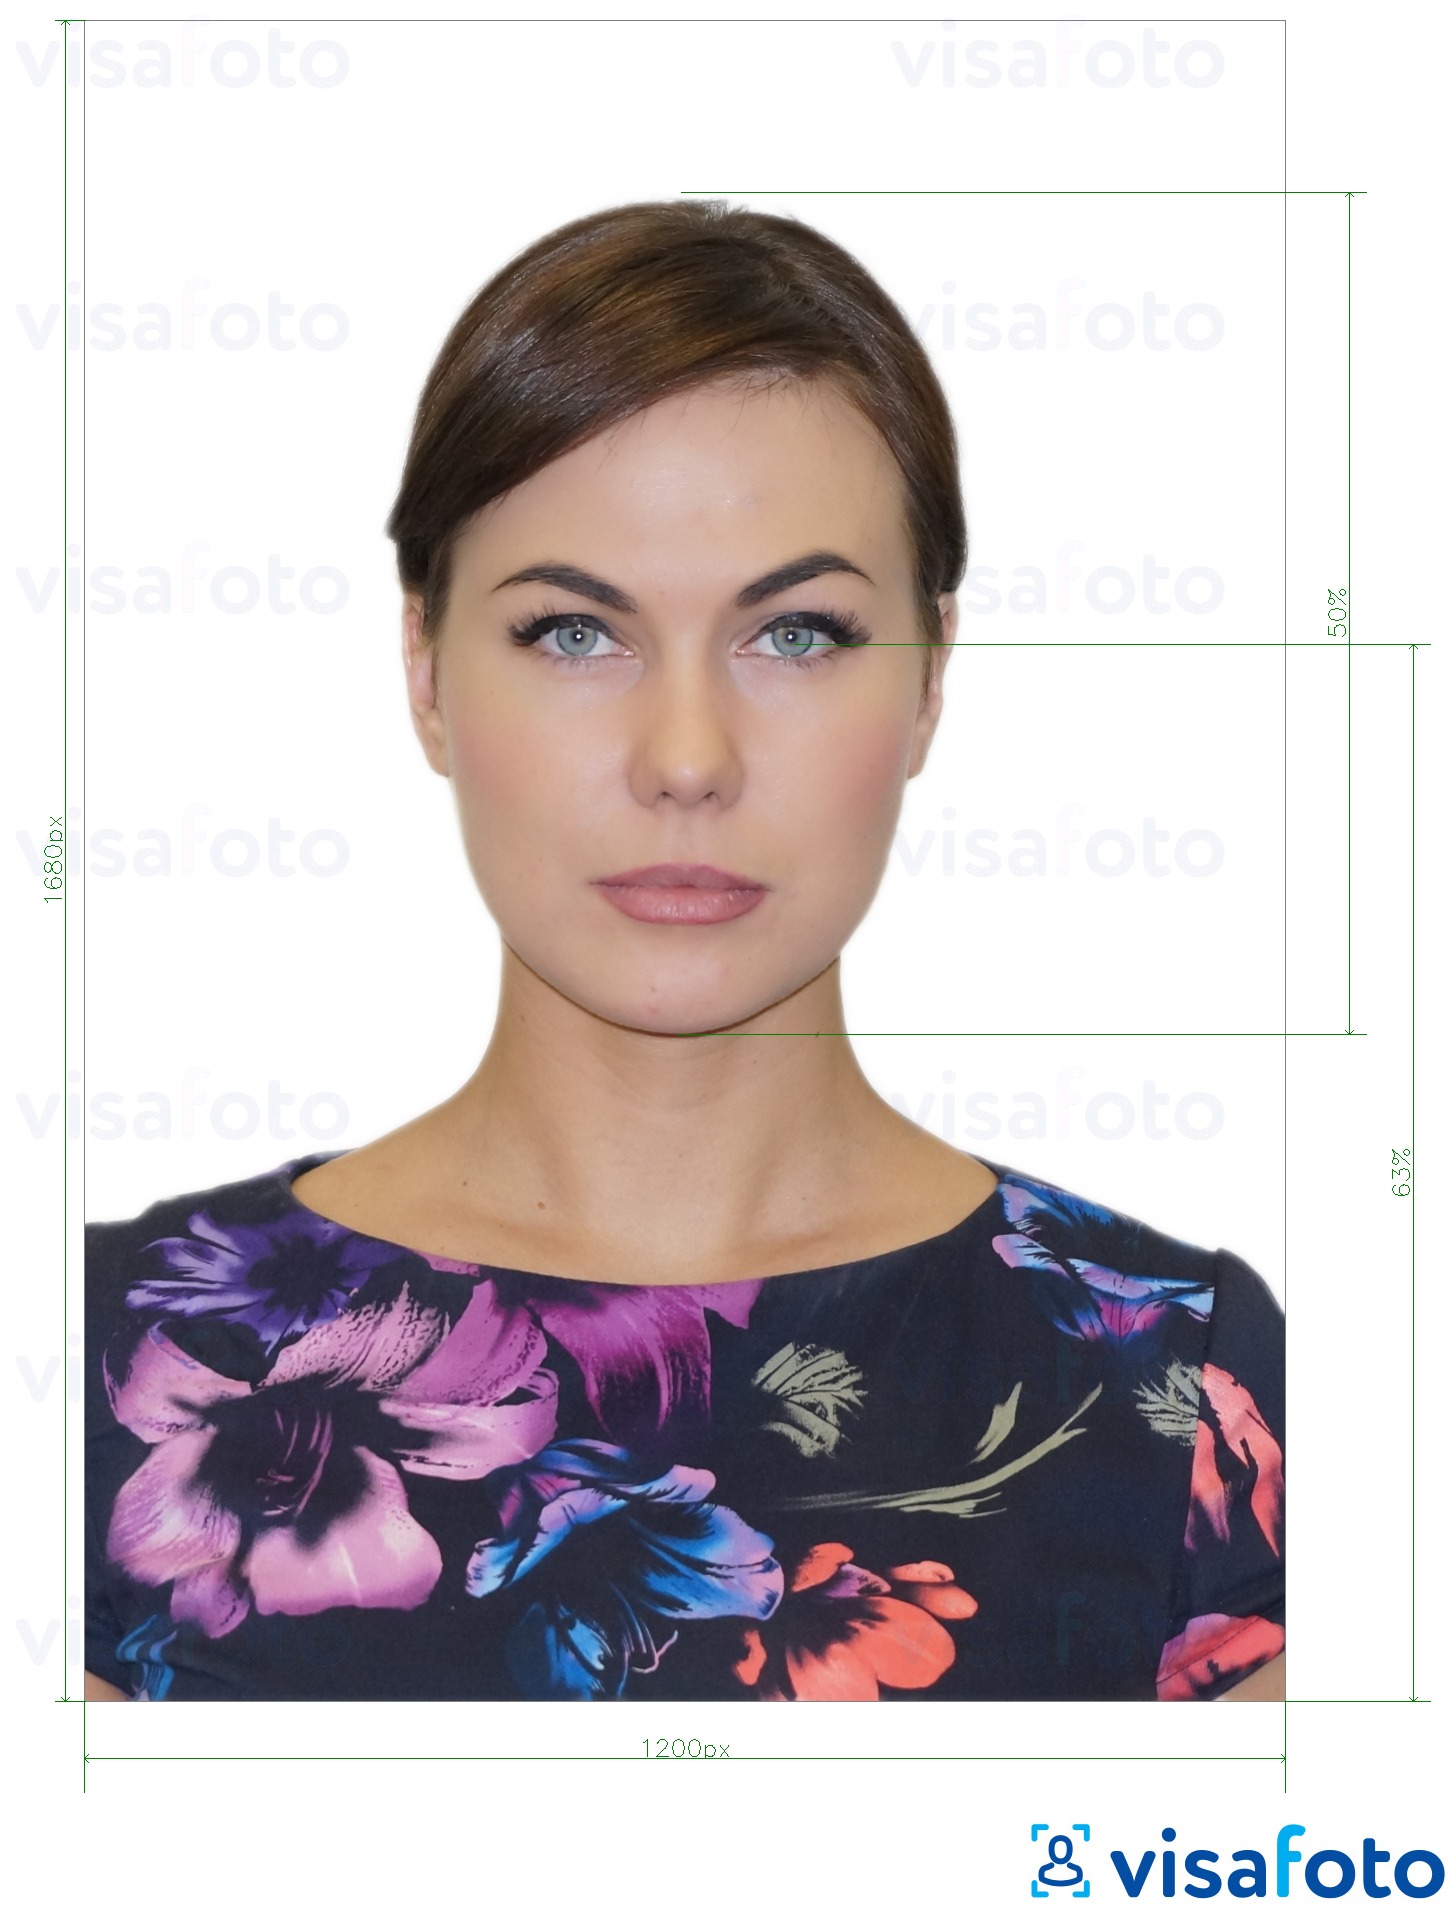 A digital photo for a Canada Permanent Resident card